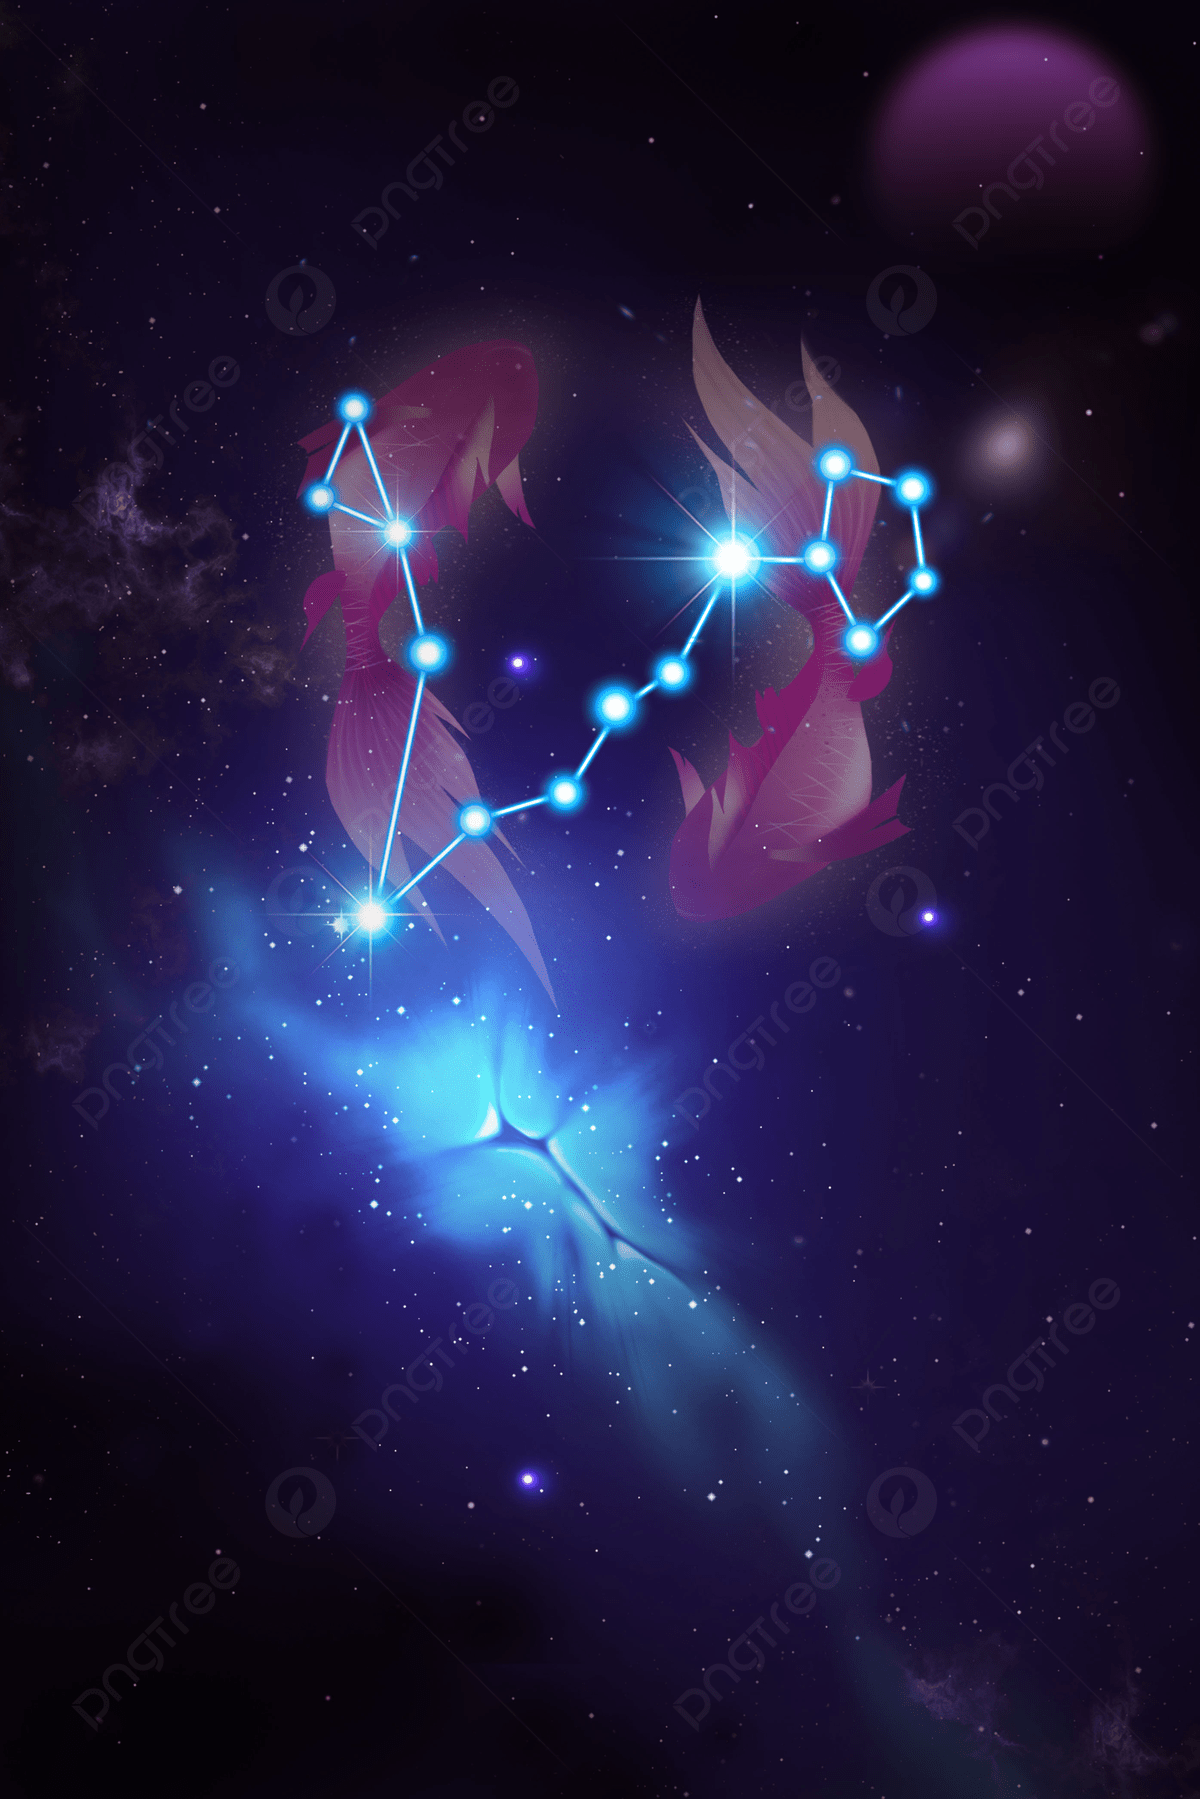 A constellation with stars and planets in the background - Pisces